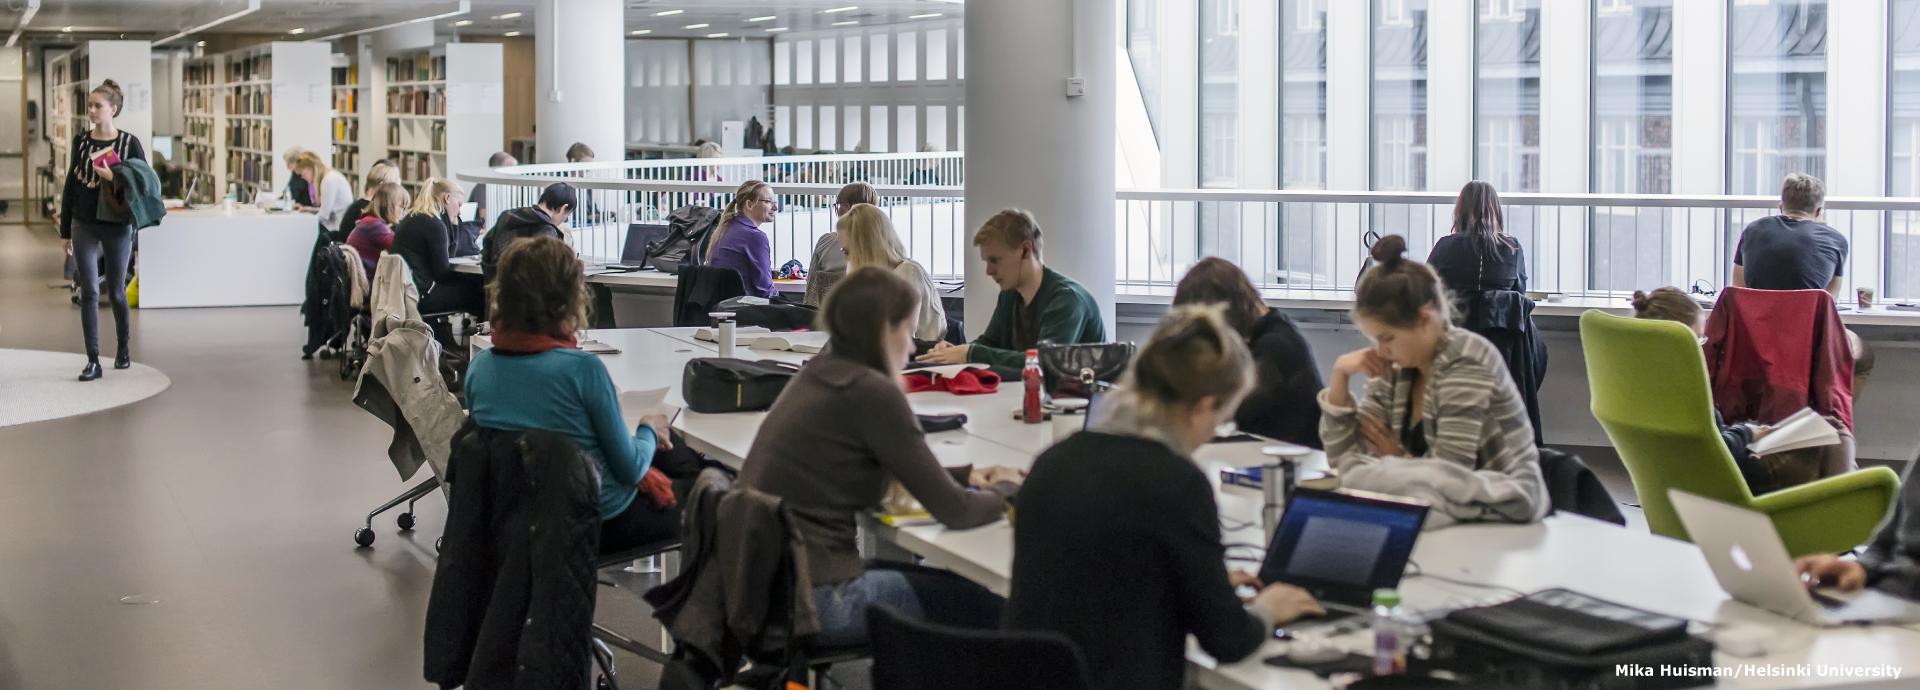 Students studying in the Helsinki University Main Library 